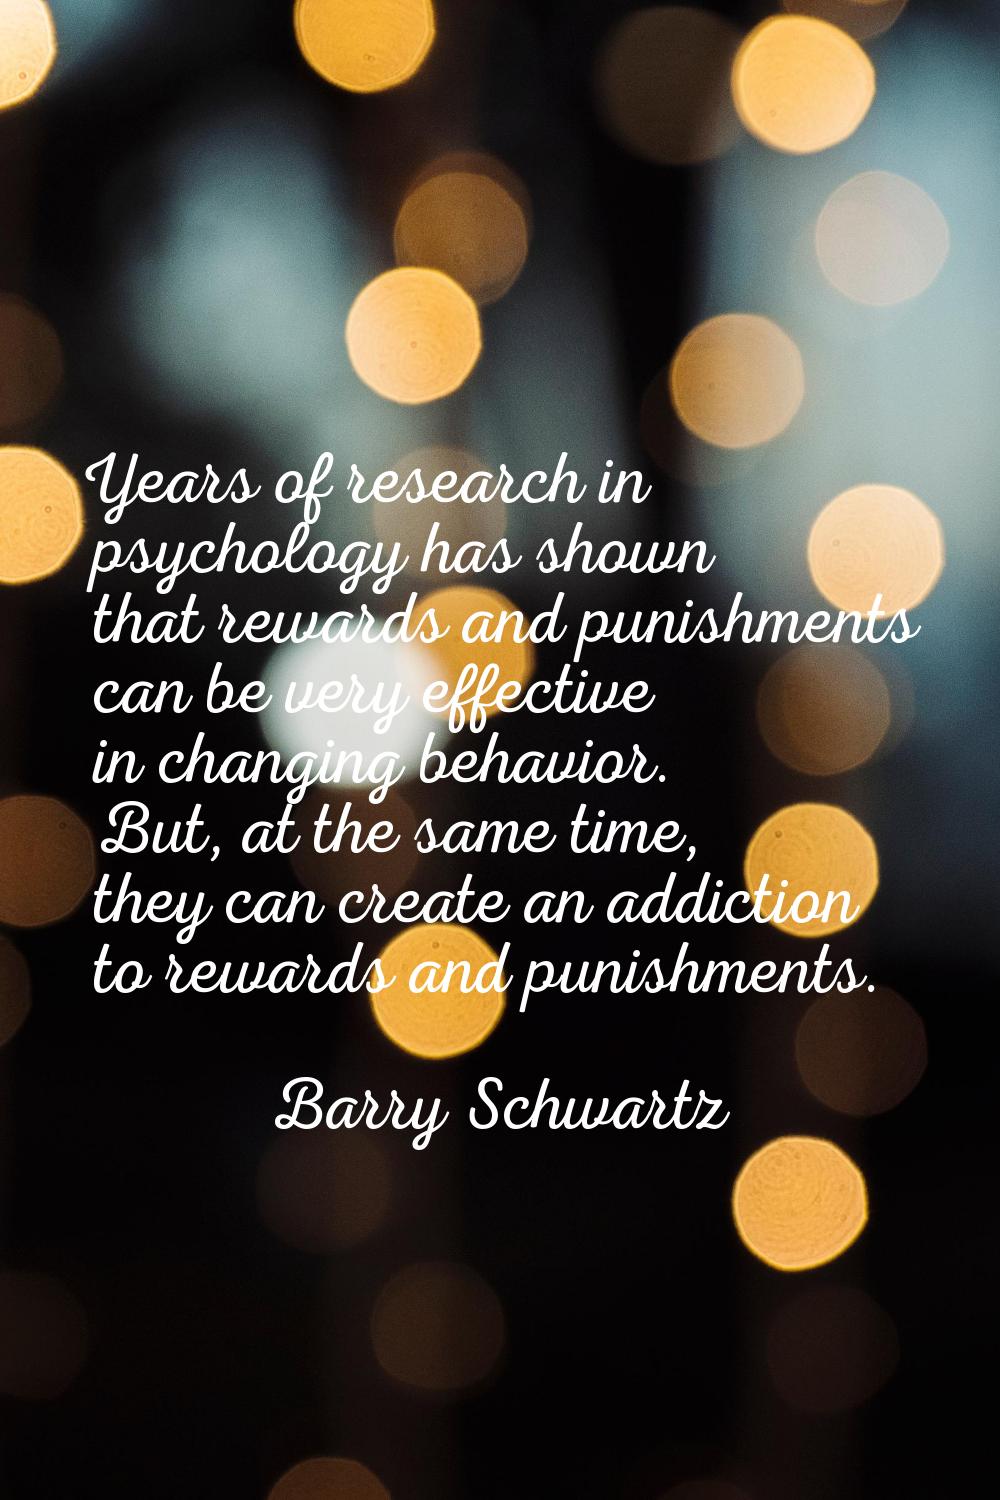 Years of research in psychology has shown that rewards and punishments can be very effective in cha